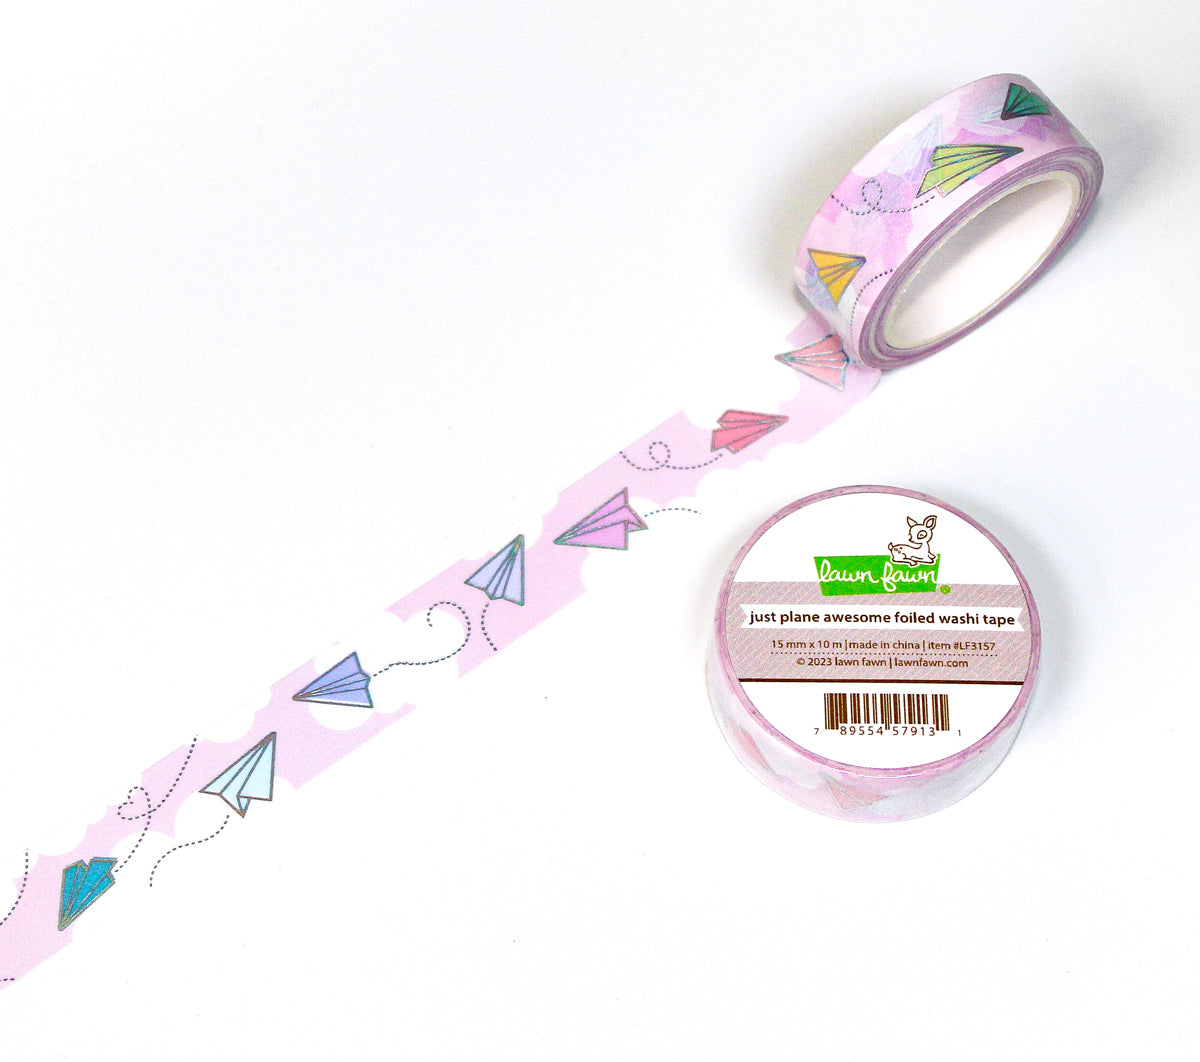 just plane awesome foiled washi tape